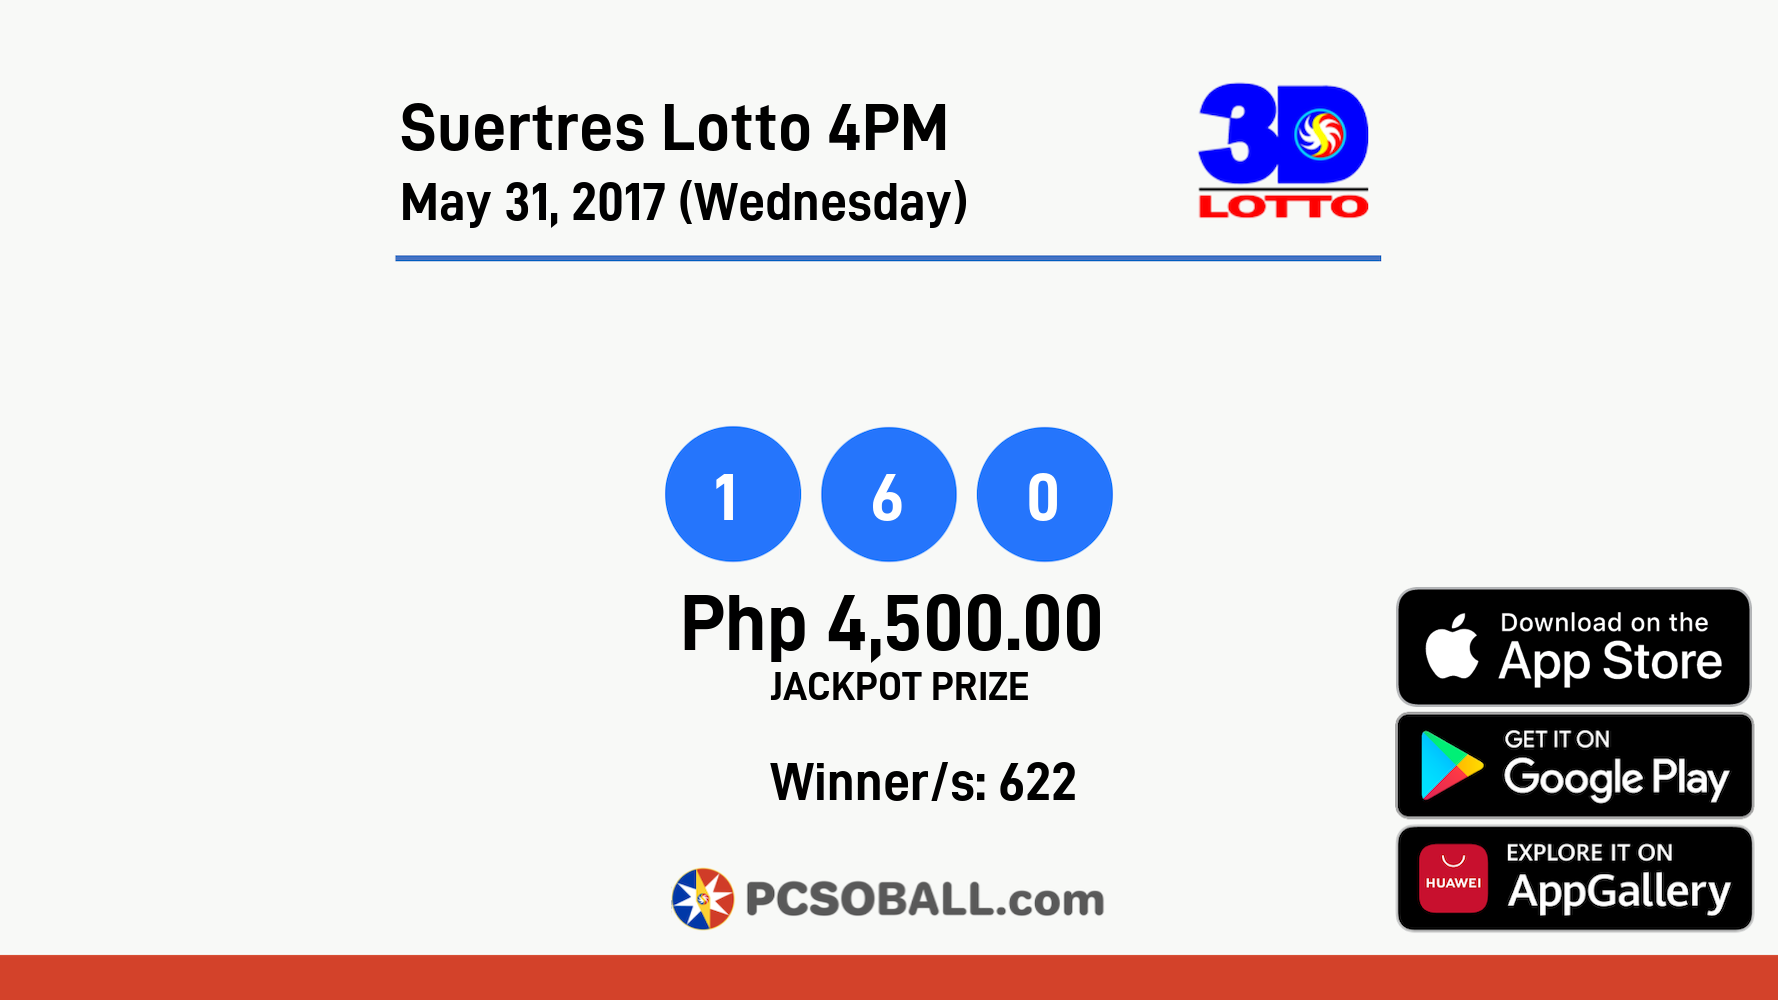 Suertres Lotto 4PM May 31, 2017 (Wednesday) Result